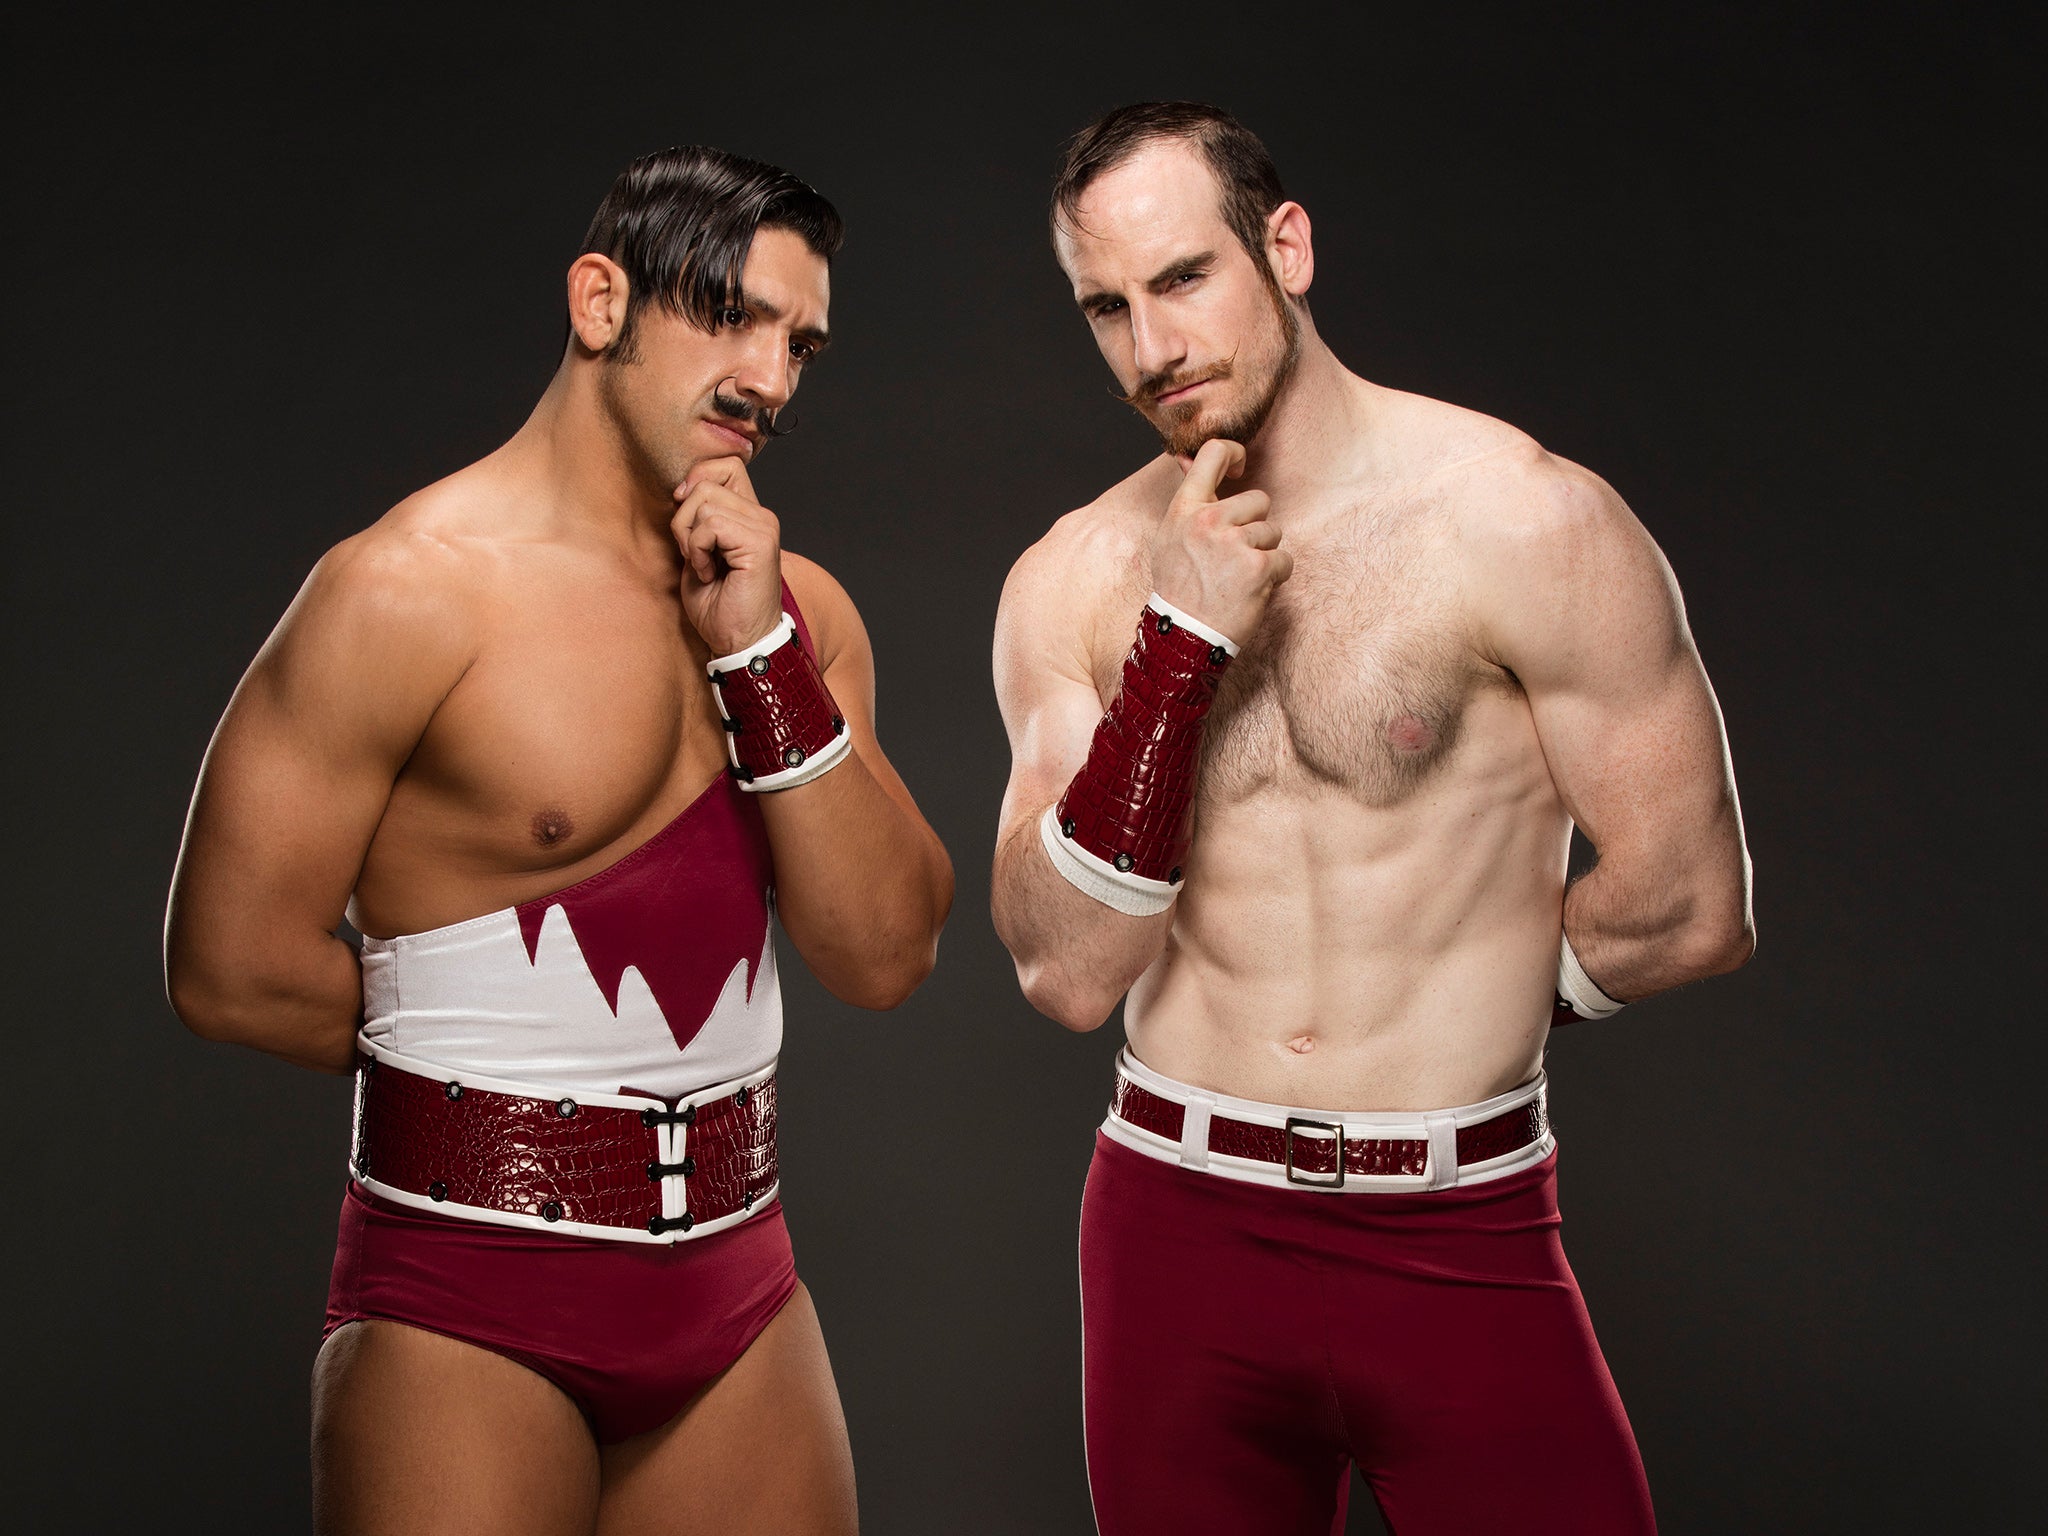 &#13;
Aiden English, right, and his tag team partner Simon Gotch?&#13;